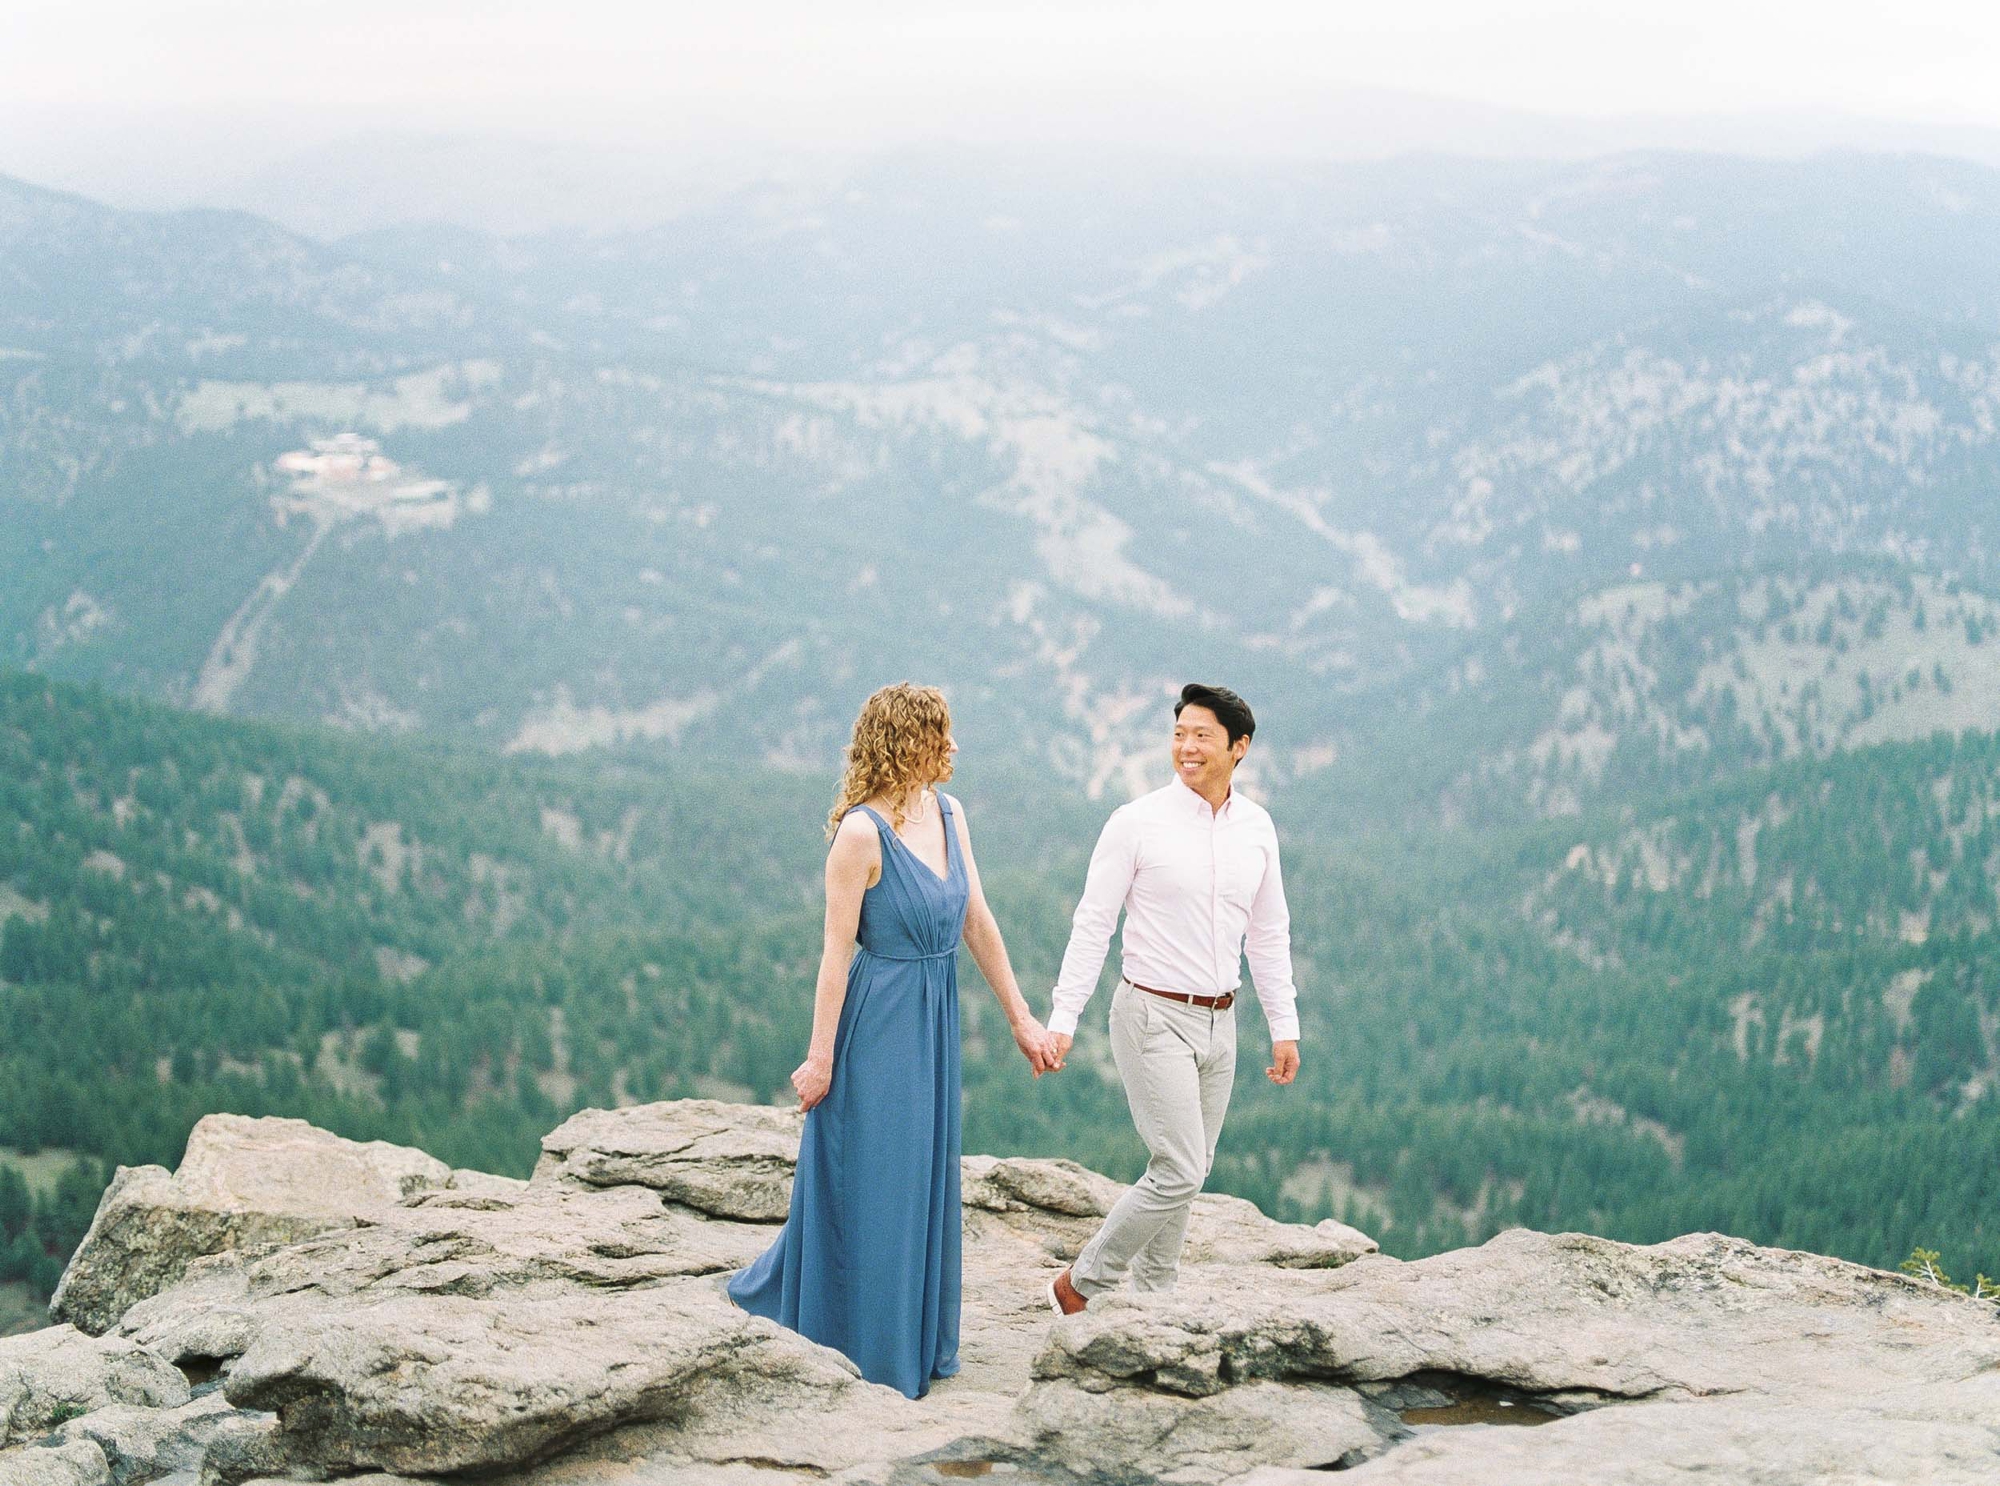 Bright image of couple walking on rocky mountain overlook in Colorado mountains